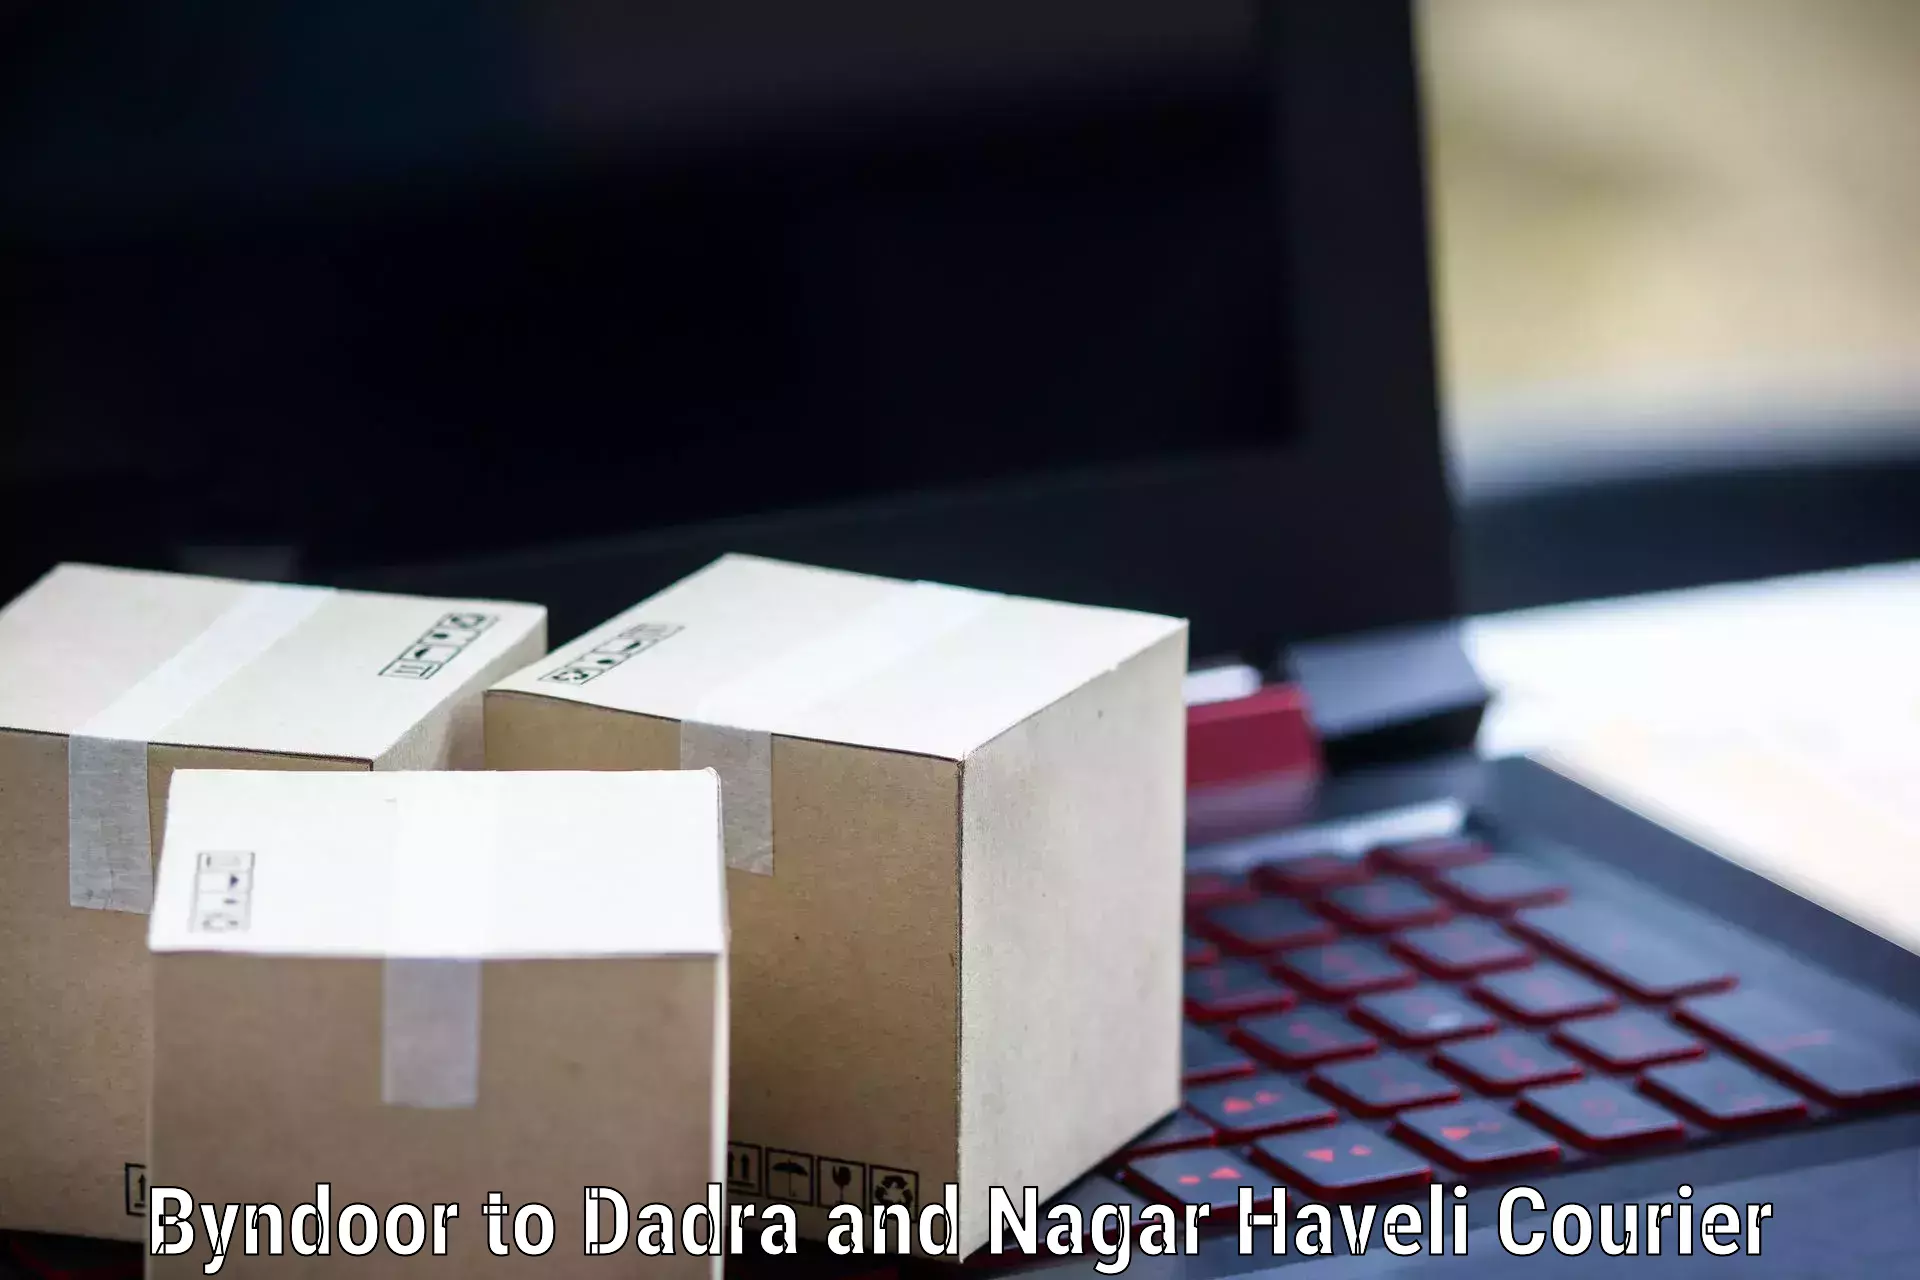 Quality courier services Byndoor to Dadra and Nagar Haveli